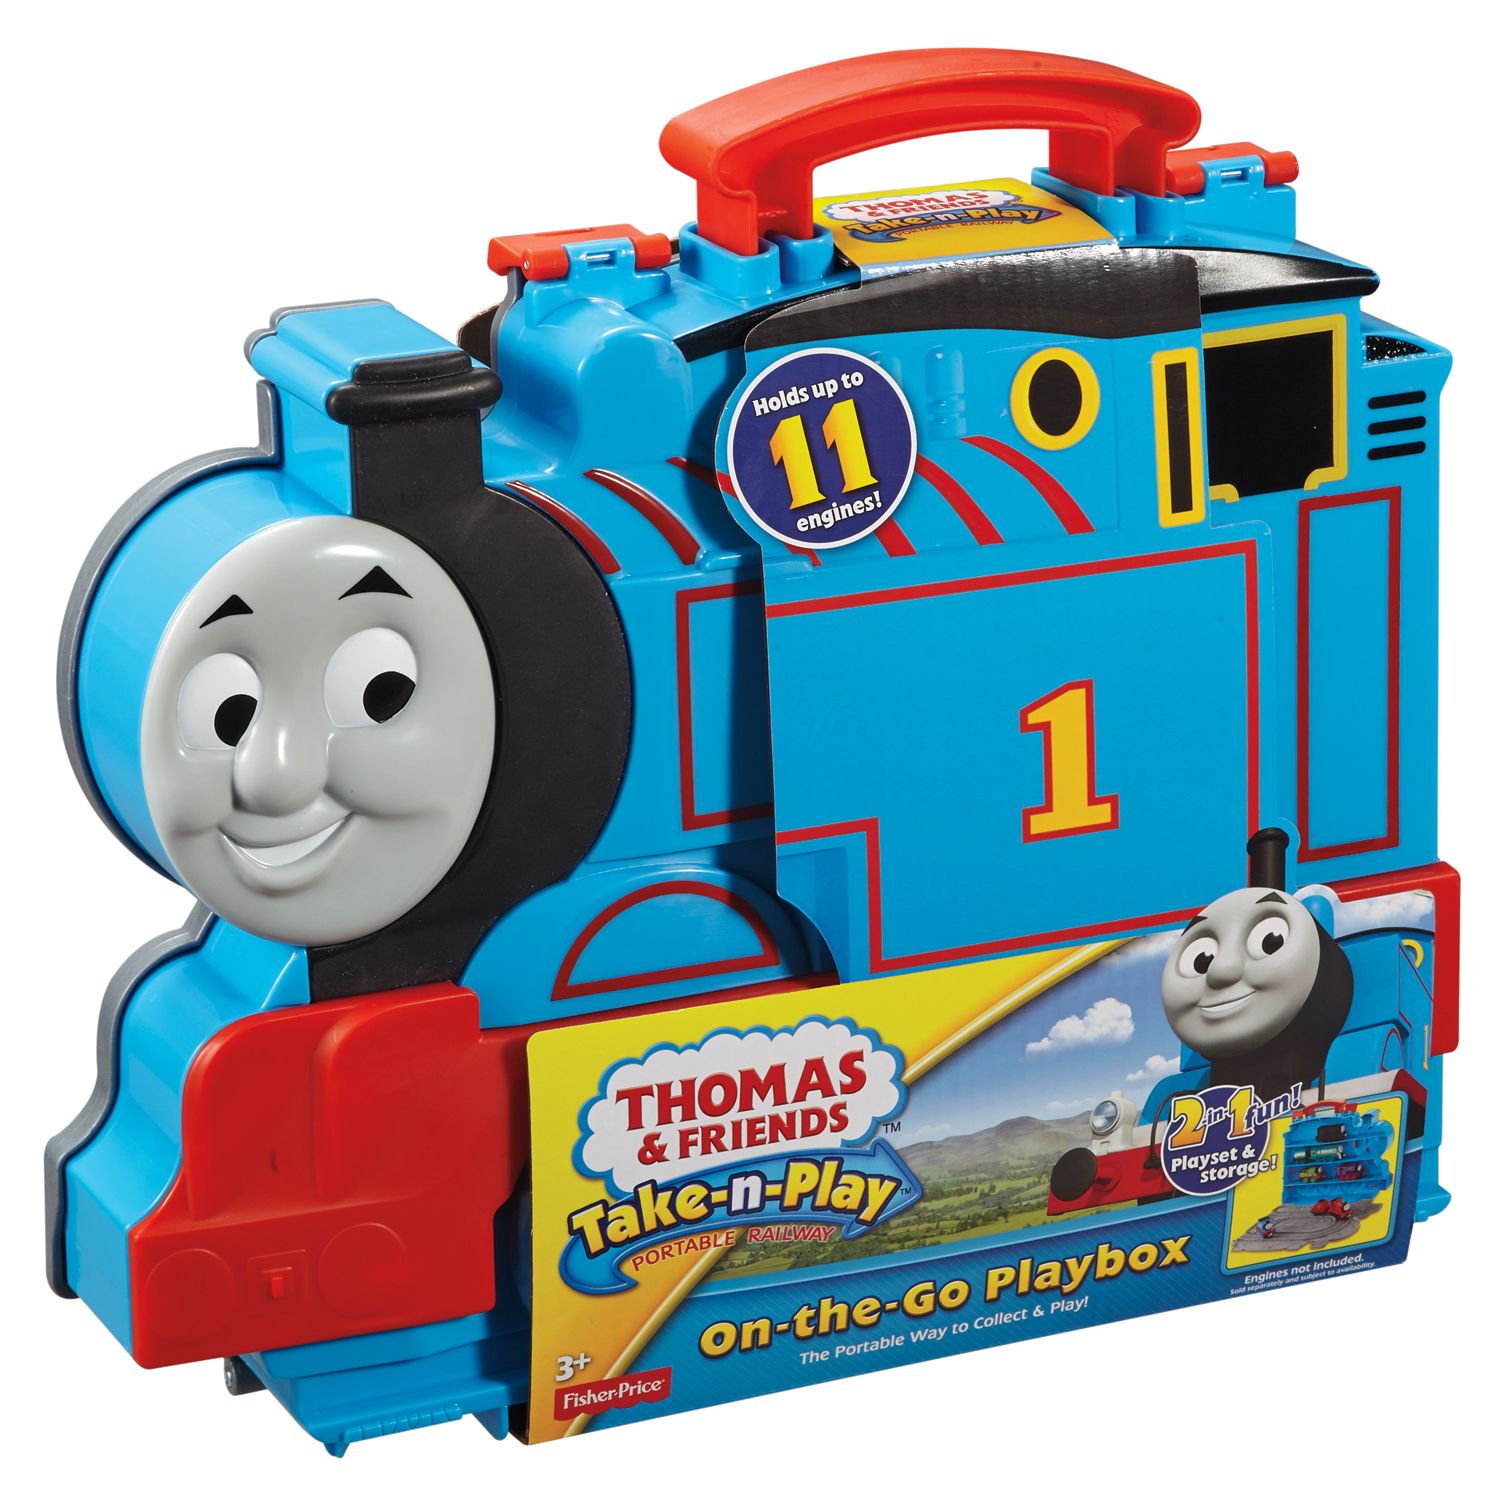 thomas & friends take n play train carry case travel on the go playbox